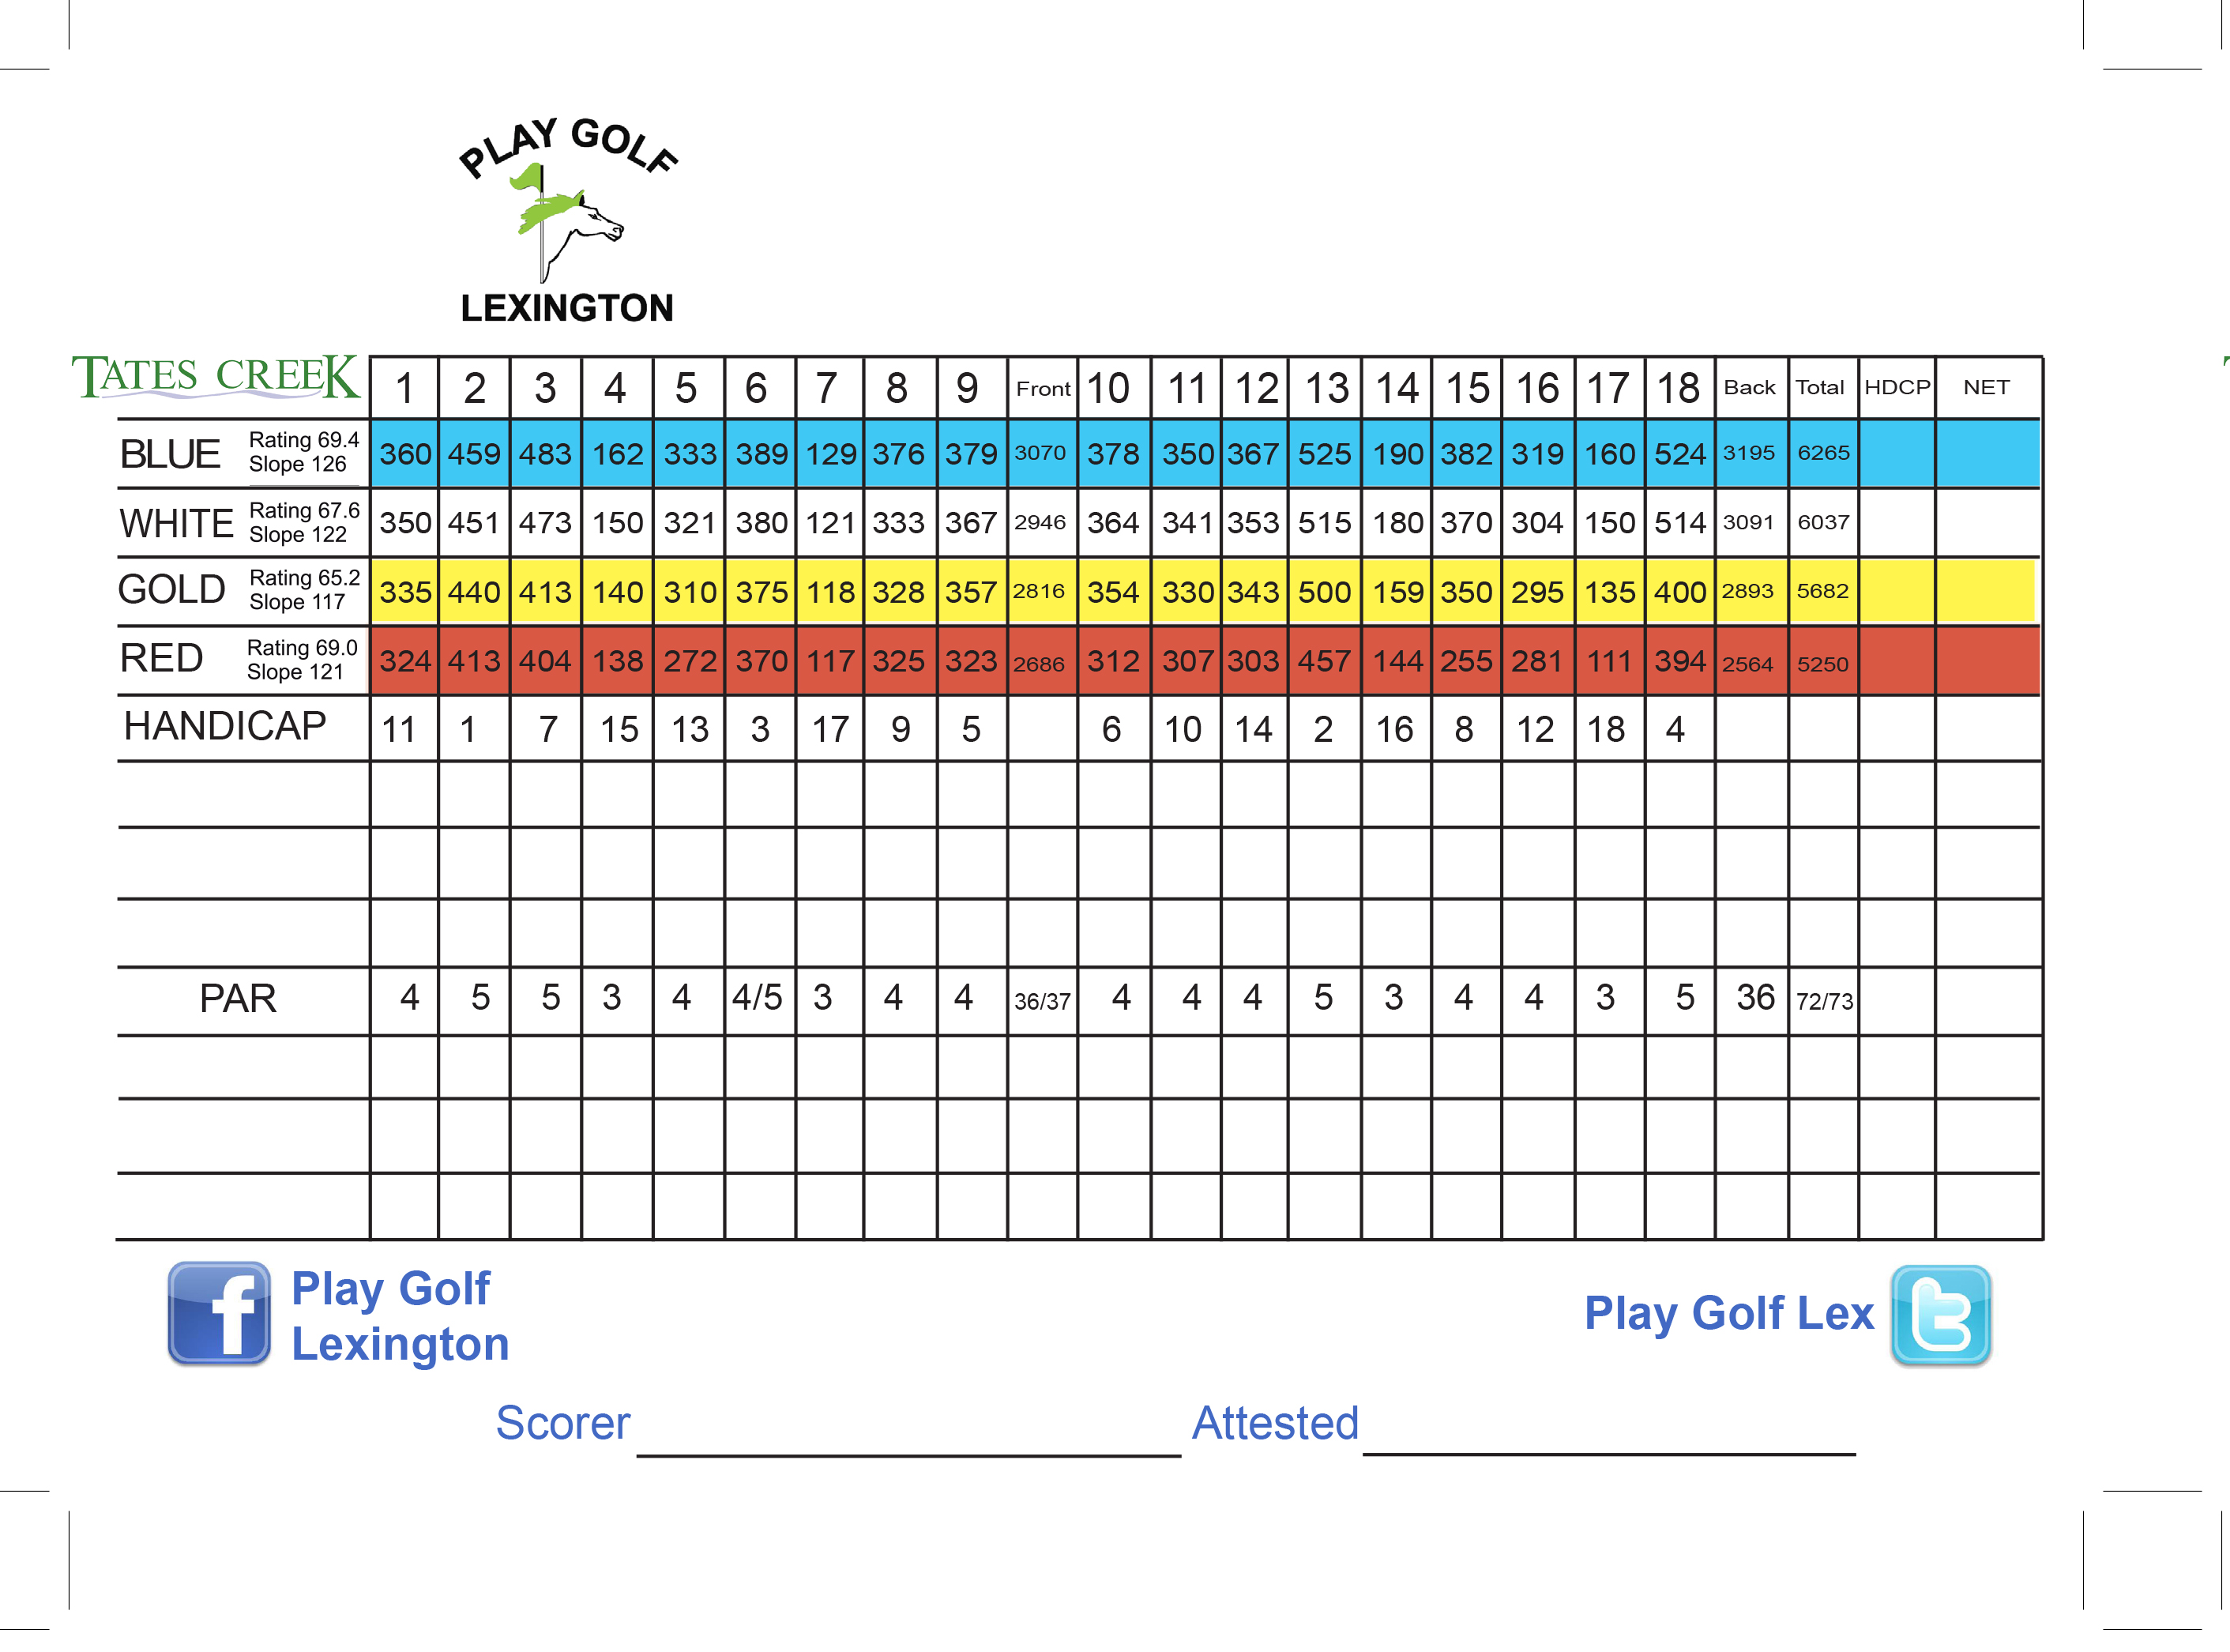 Full course details for bass rocks golf club, including scores leaderboard,...